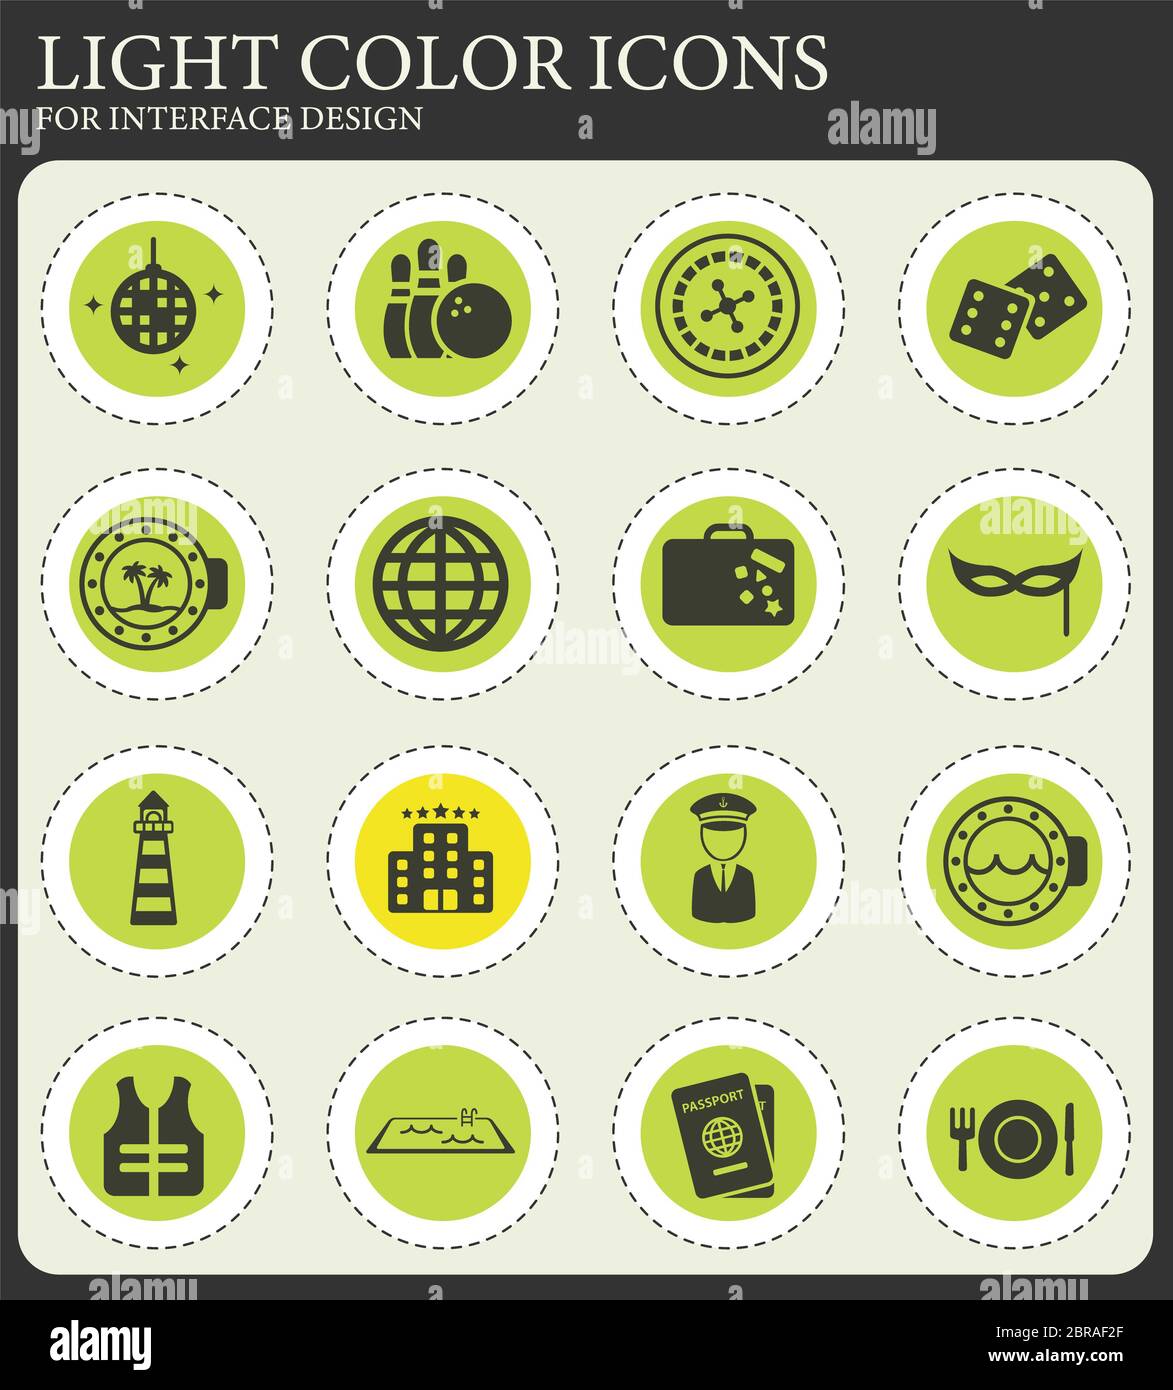 Cruise simply web icons for user interface design Stock Photo